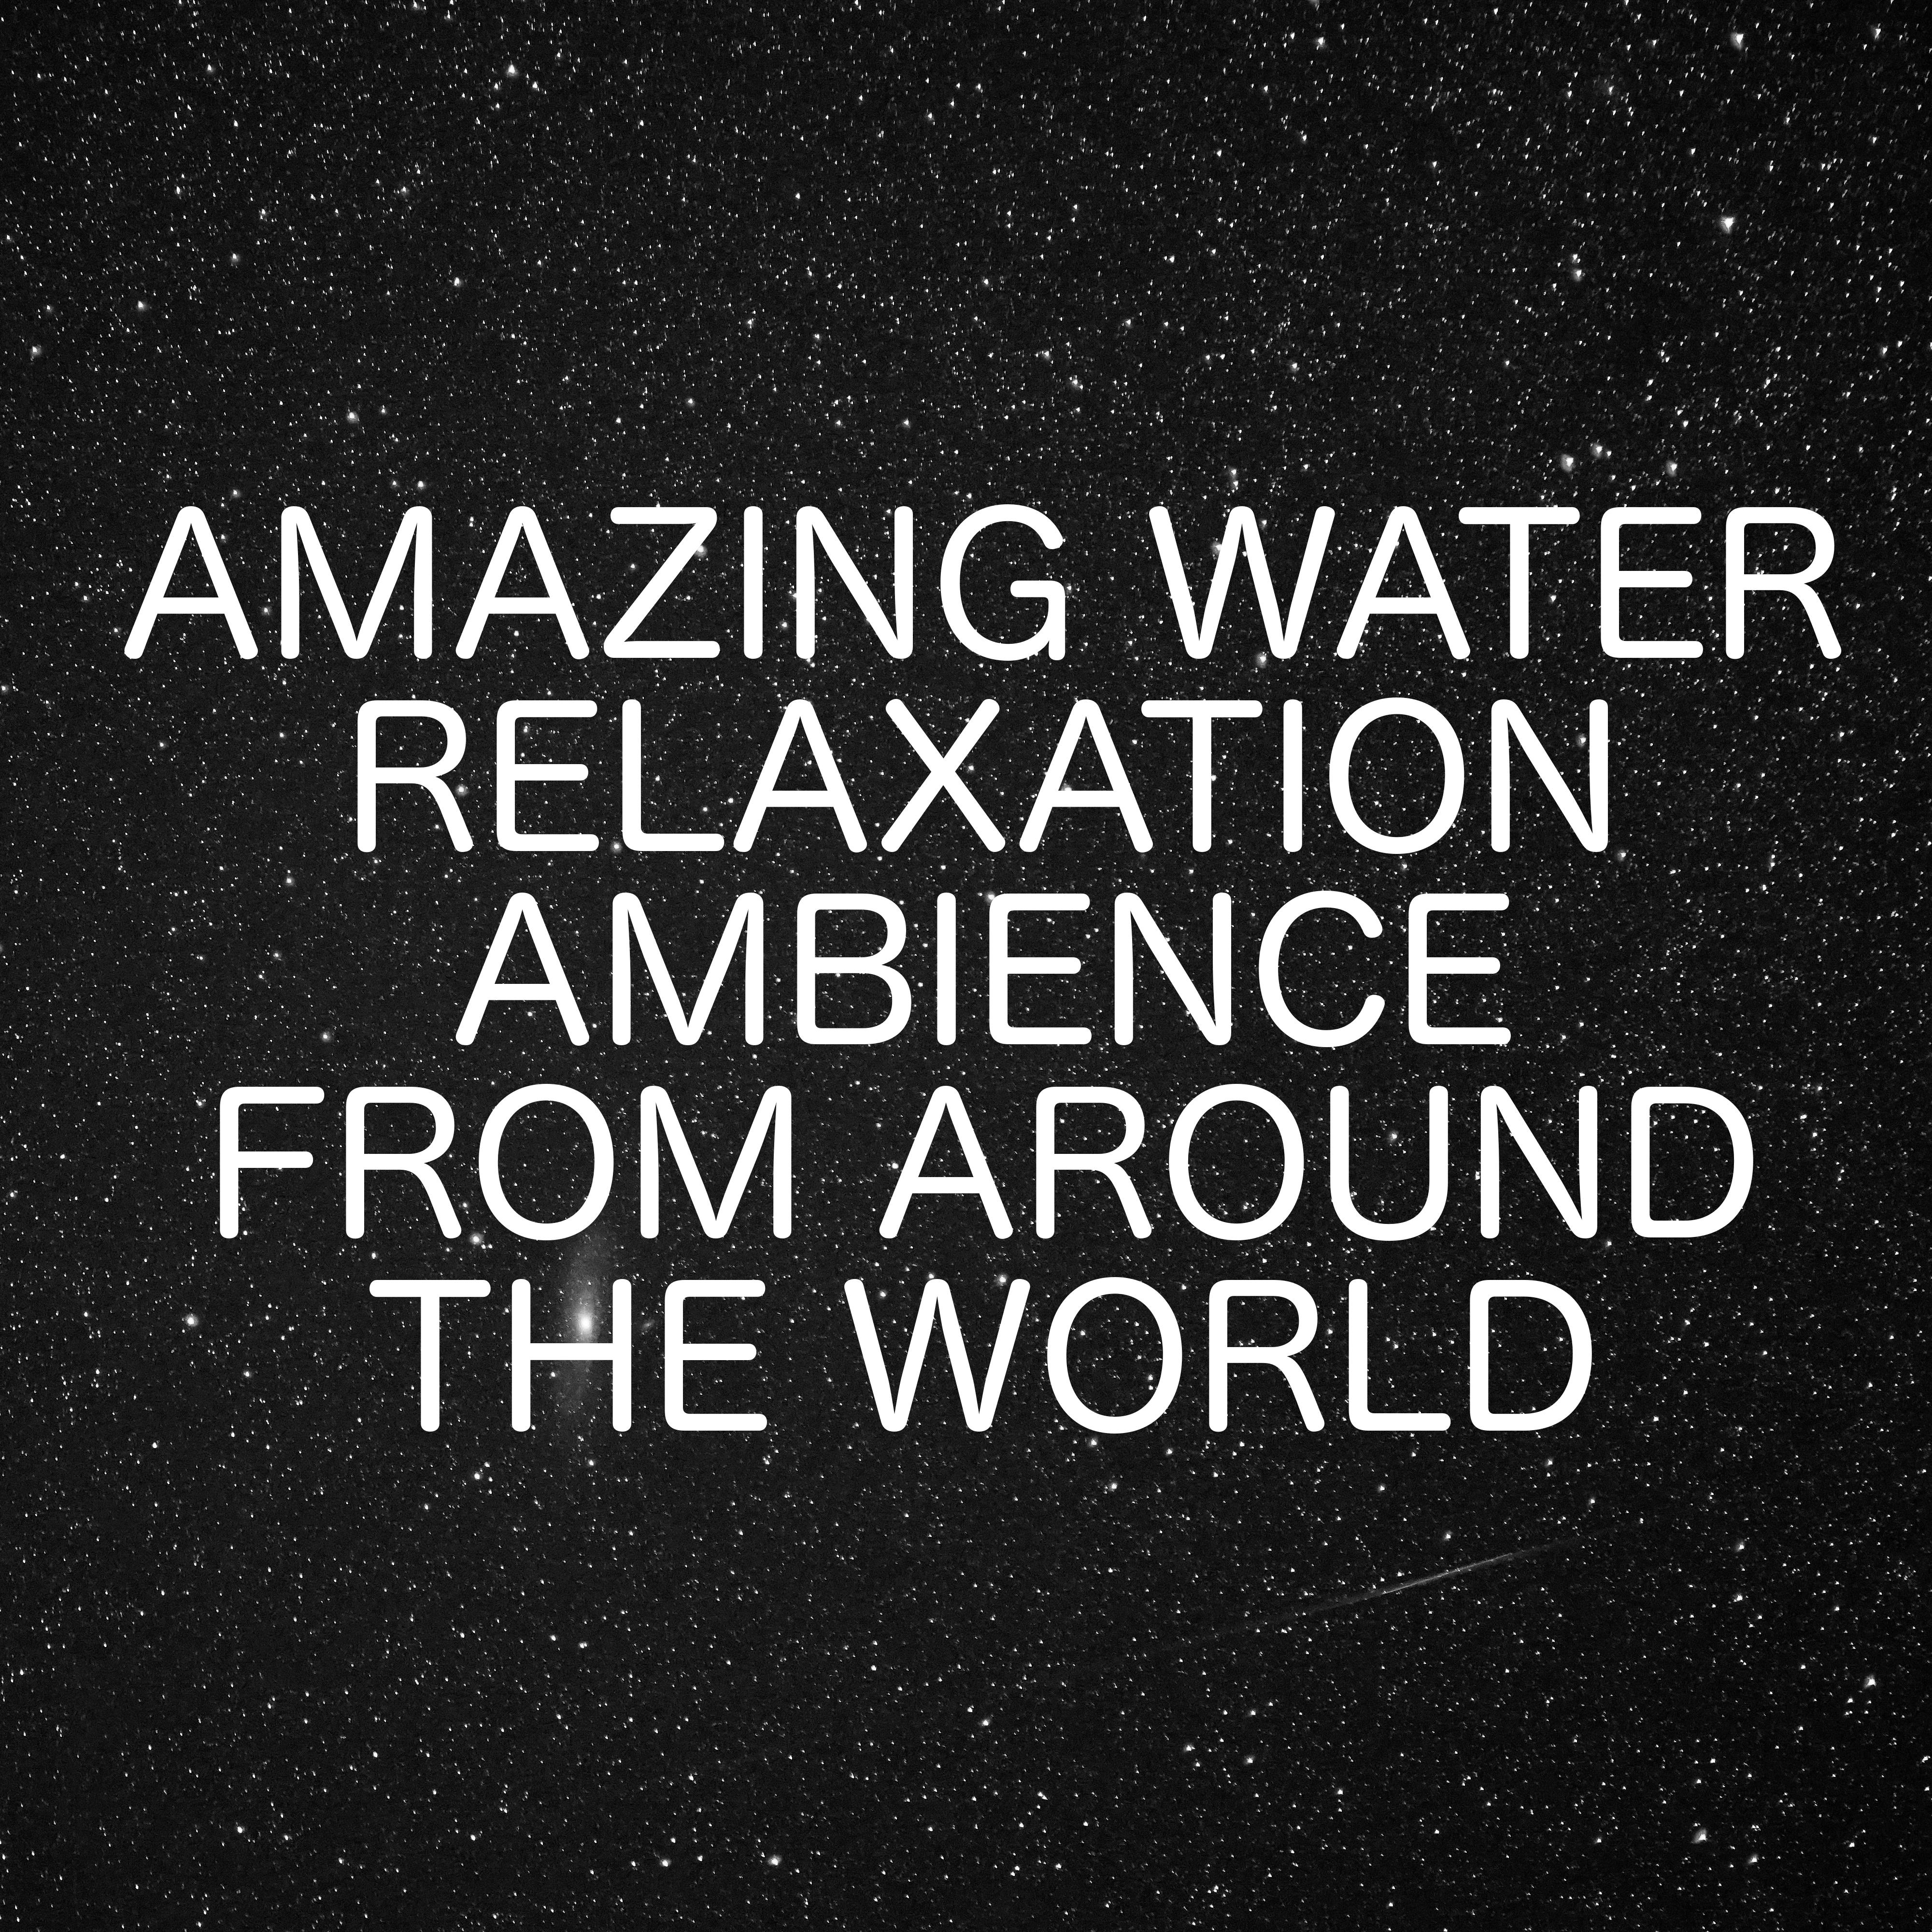 Amazing Water Relaxation Ambience From Around The World